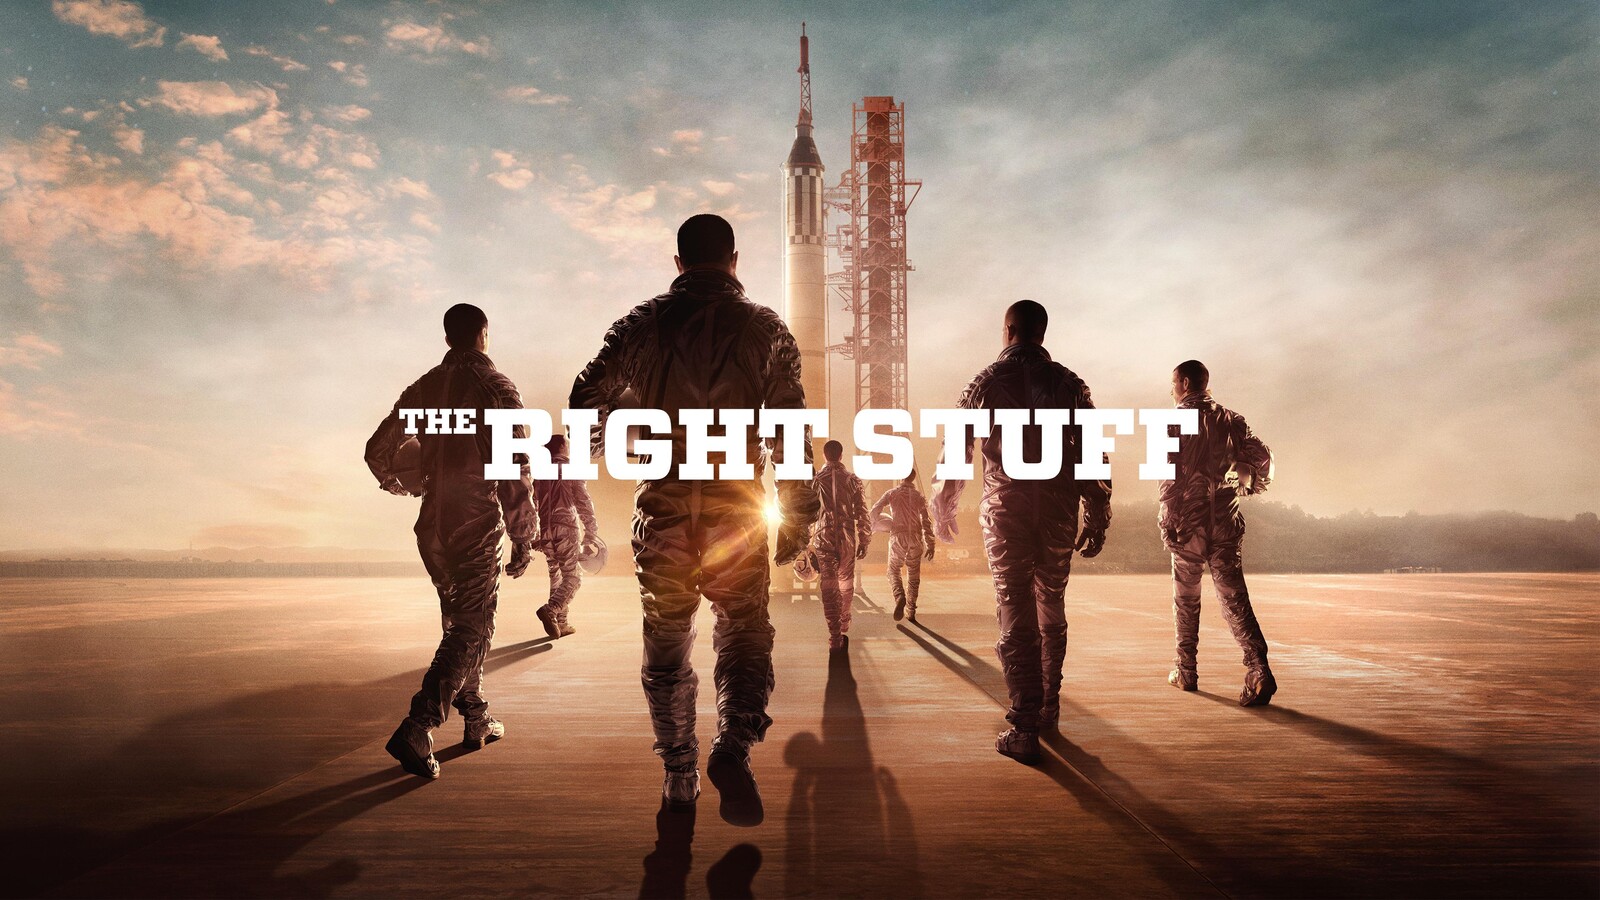 The Right Stuff cast and logo